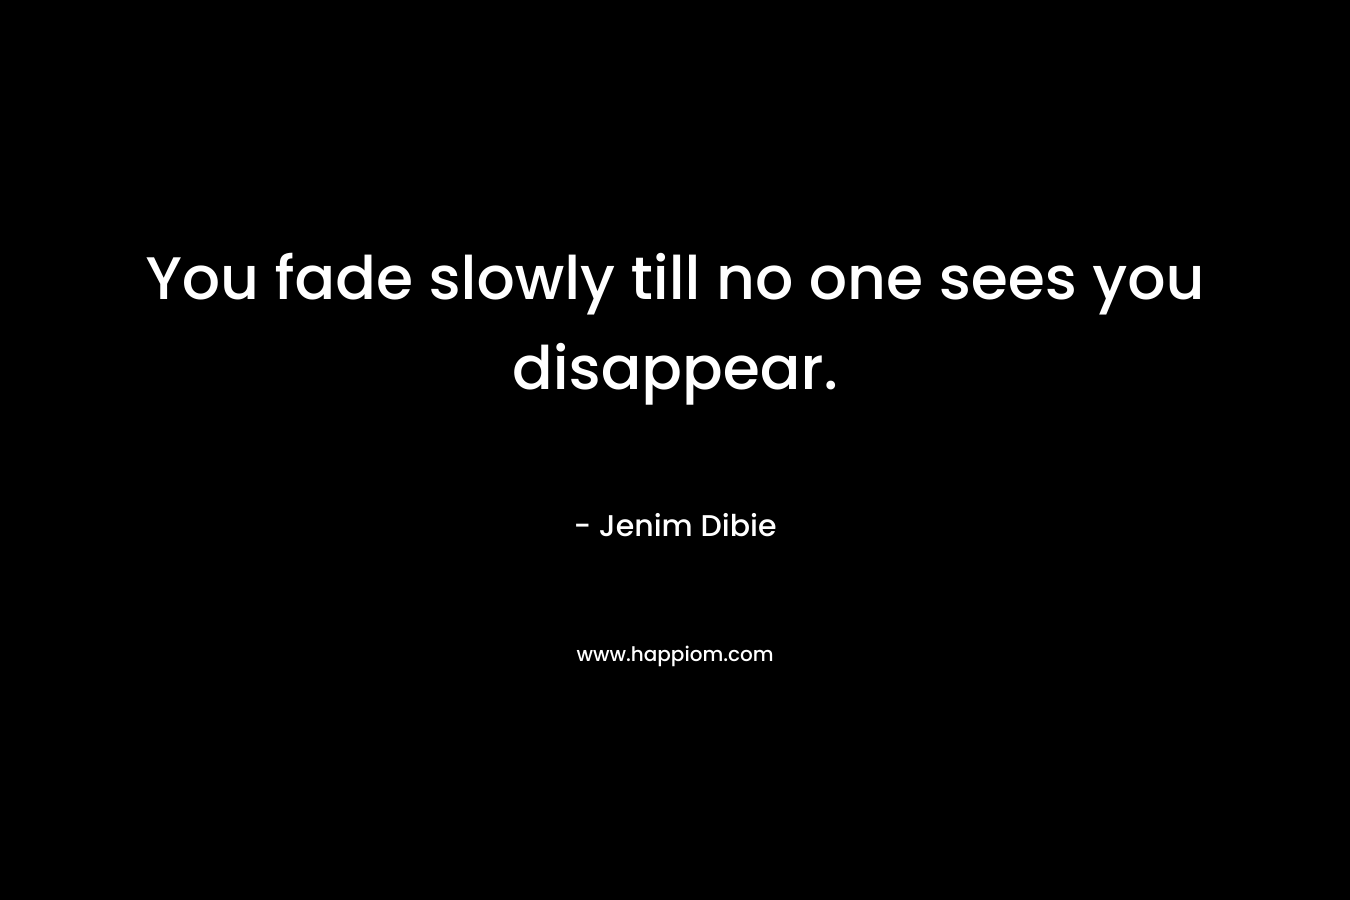 You fade slowly till no one sees you disappear. – Jenim Dibie